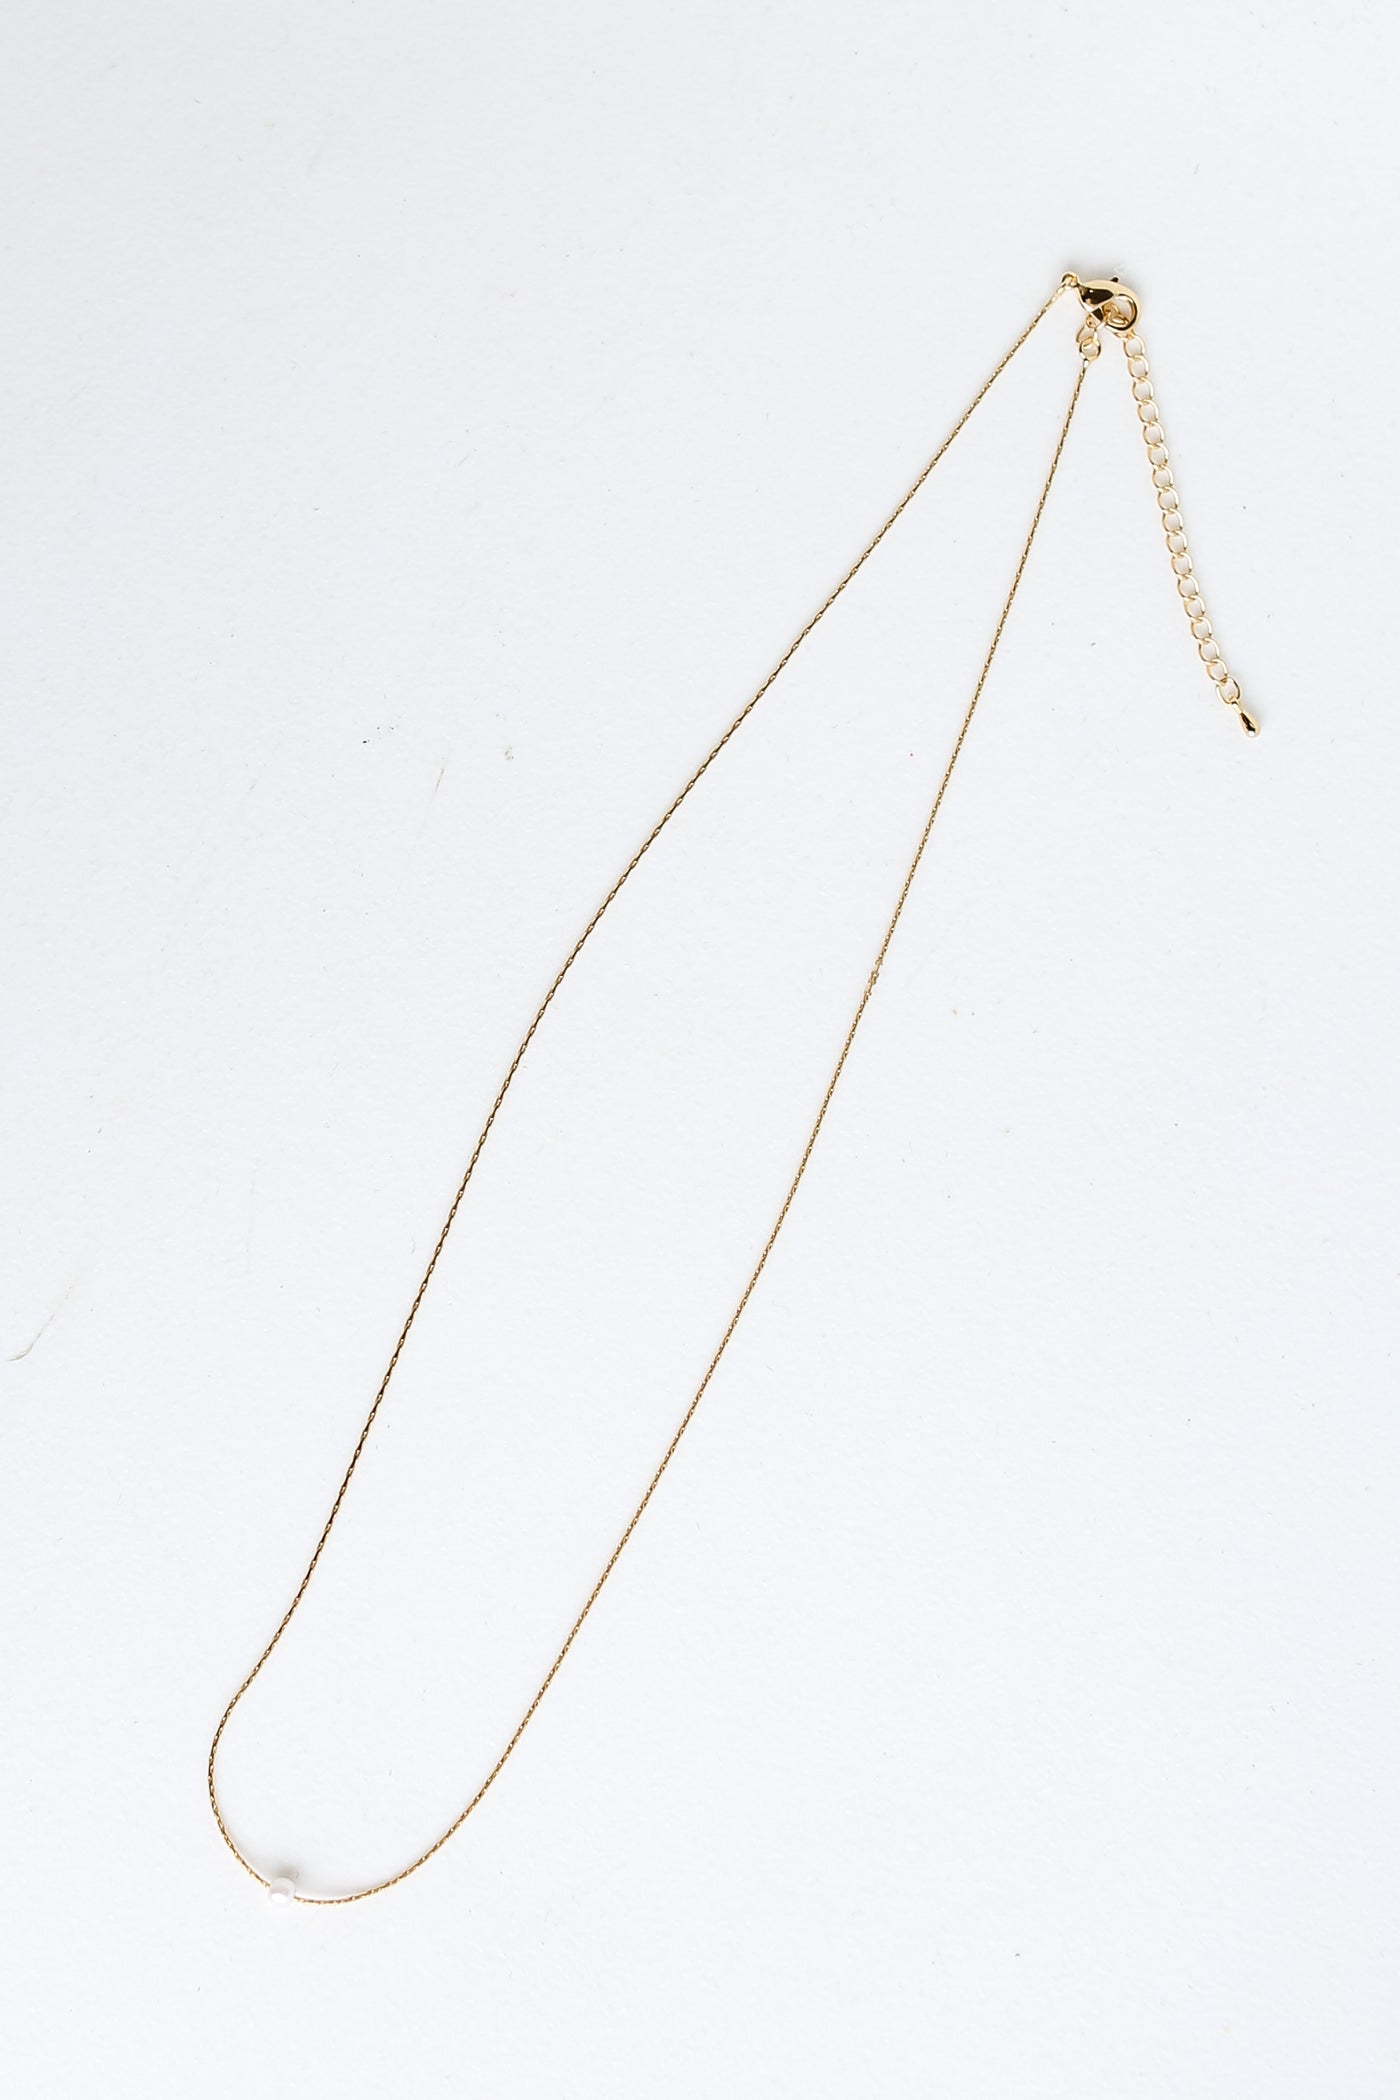 Gold Pearl Charm Necklace flat lay